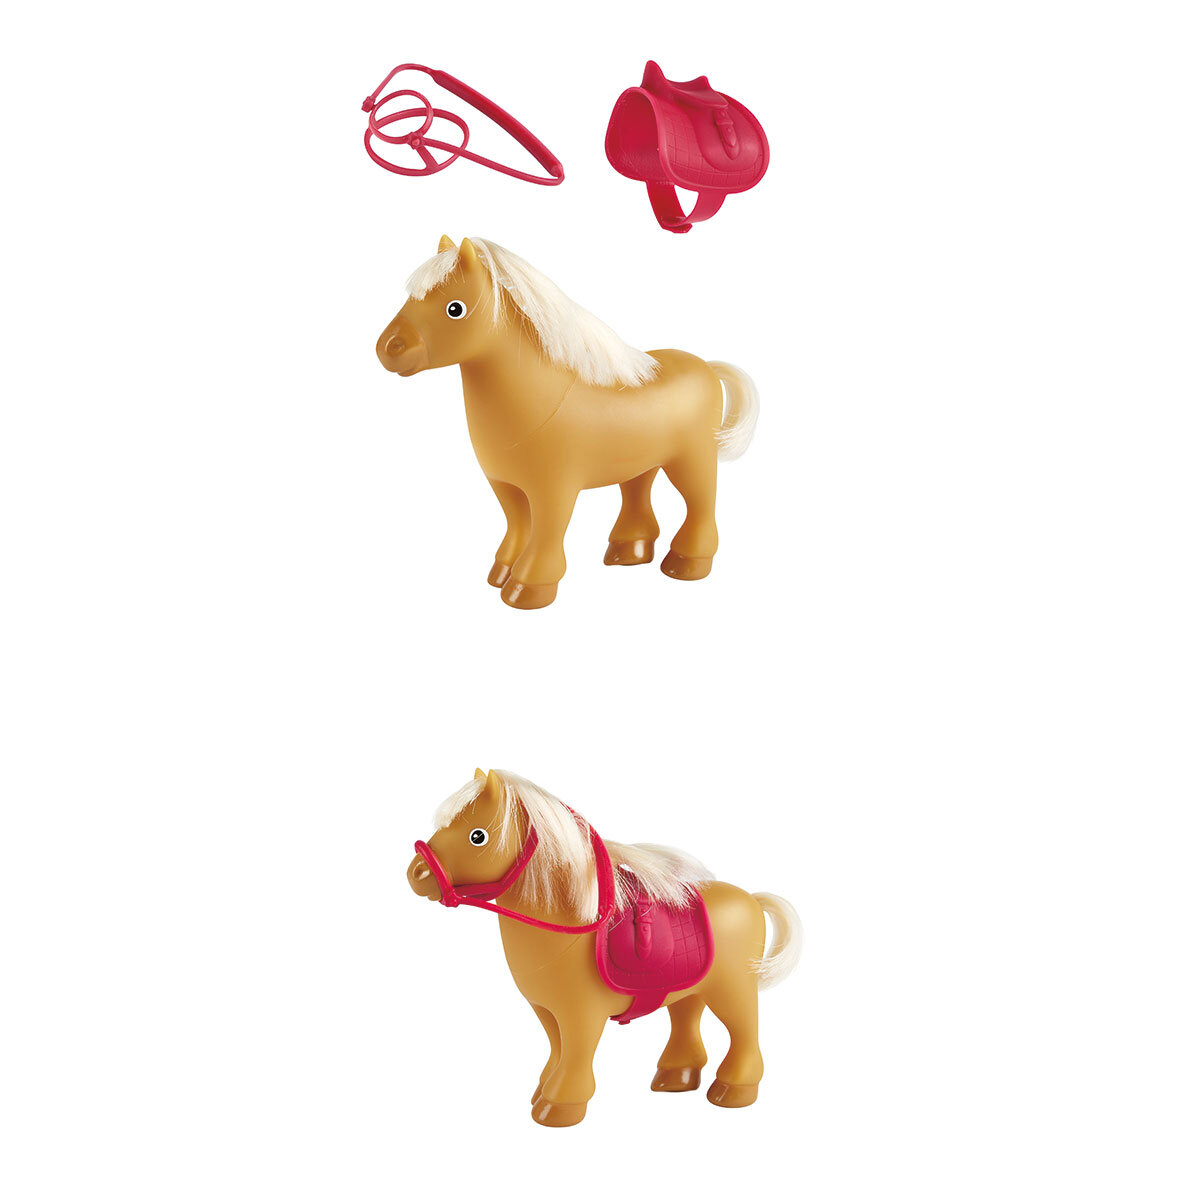 Buy Hape Pony Club Ranch Feature3 Image at Costco.co.uk